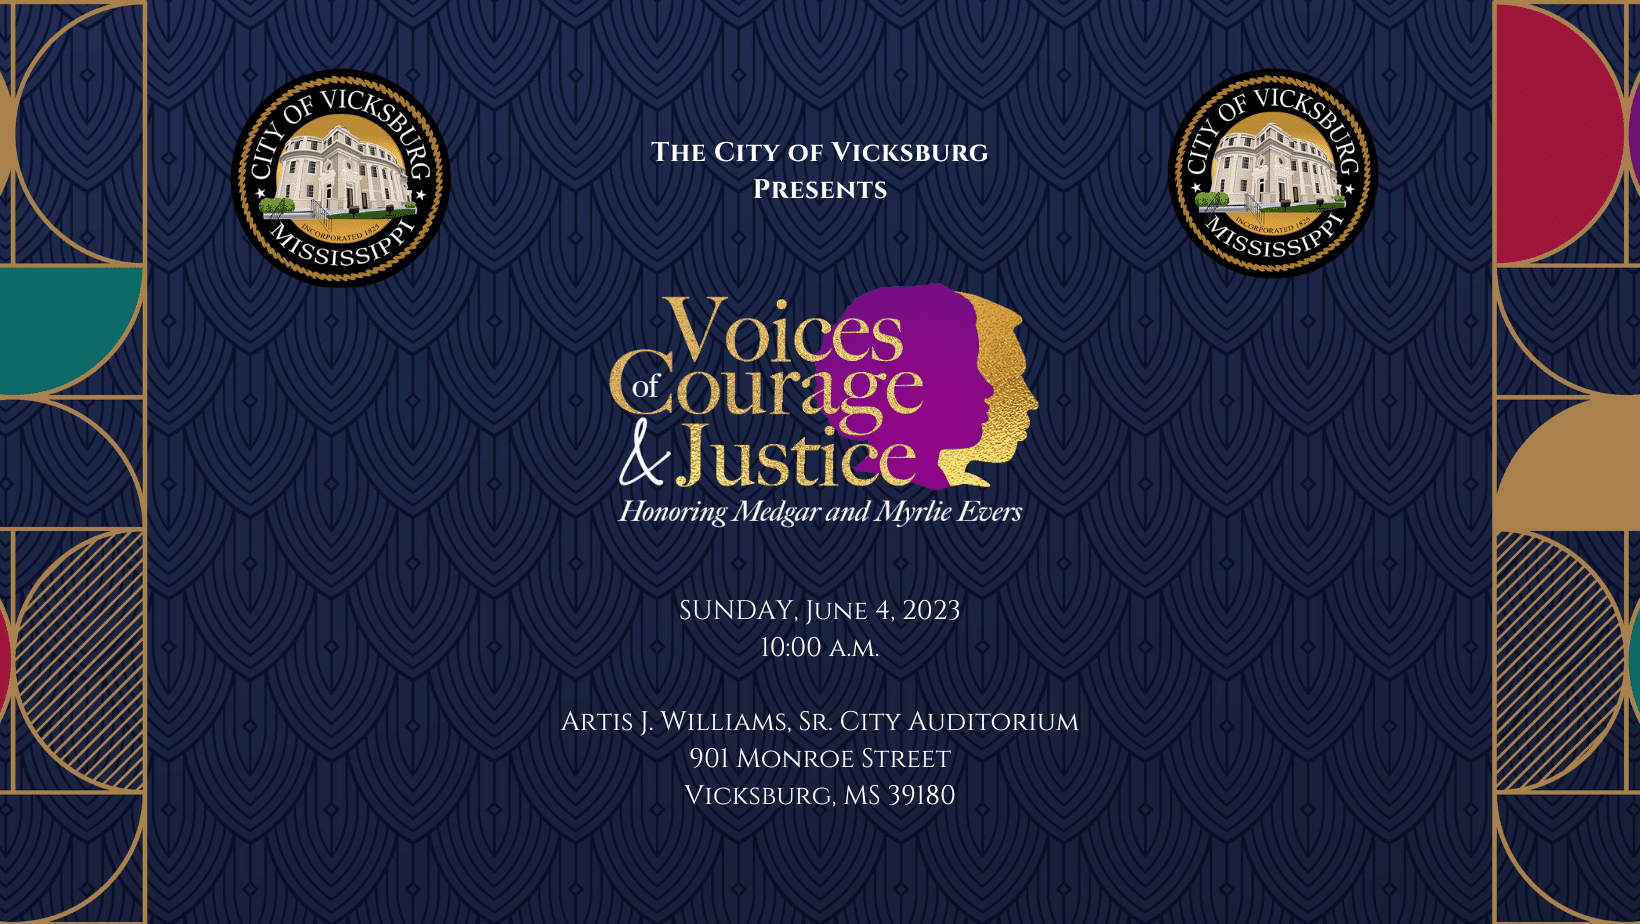 Voices of Courage & Justice: Honoring Medgar and Myrlie Evers